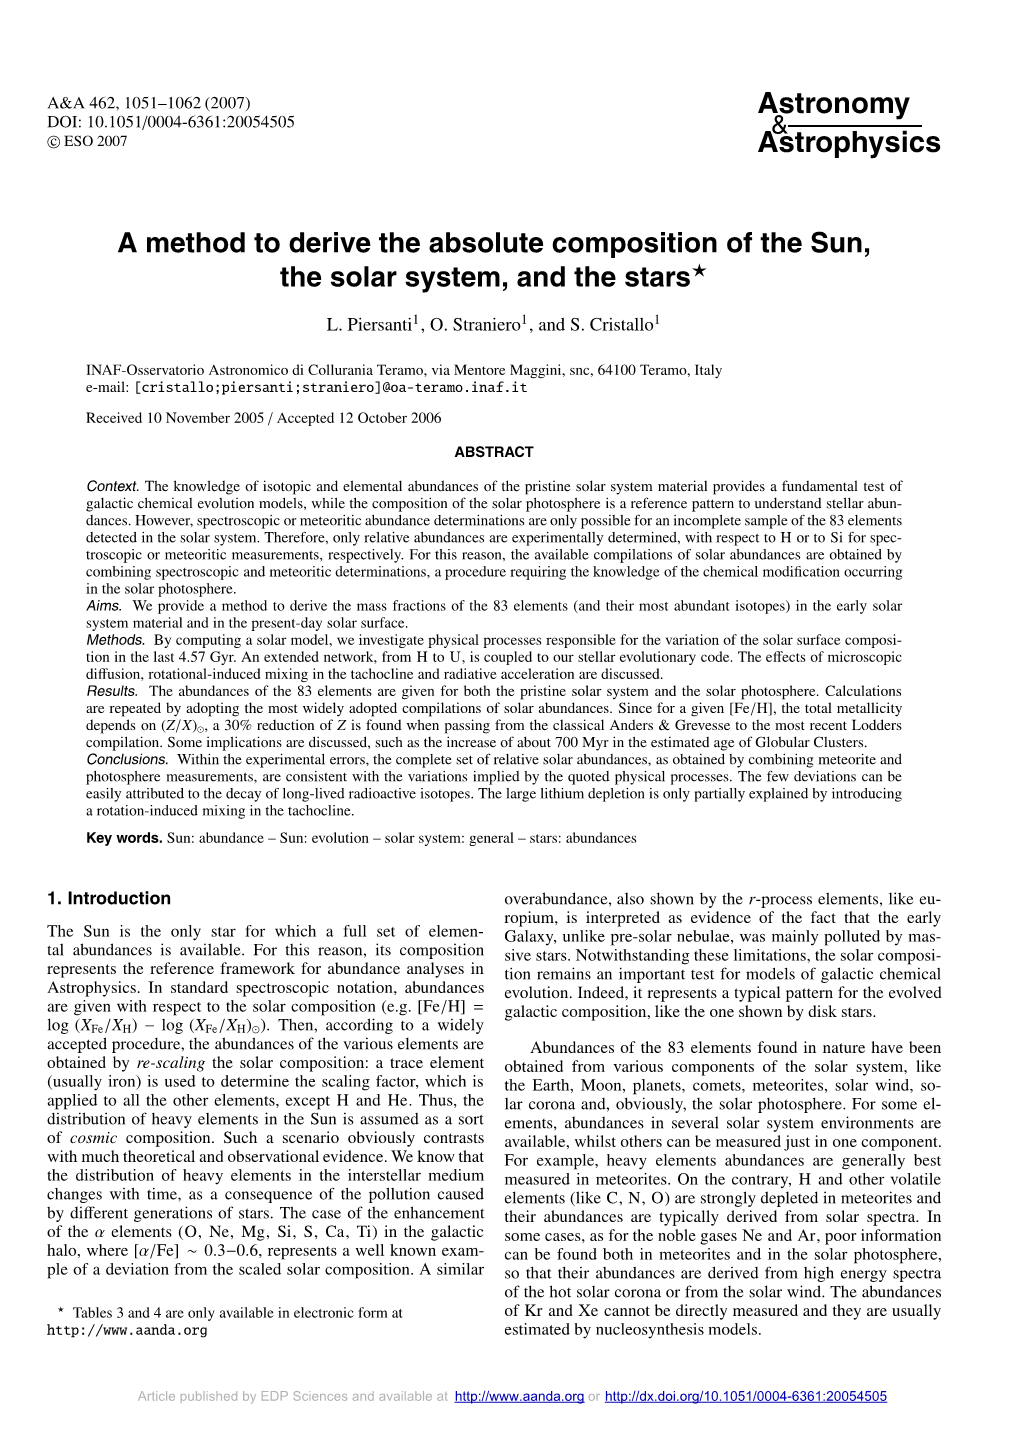 A Method to Derive the Absolute Composition of the Sun, the Solar System, and the Stars